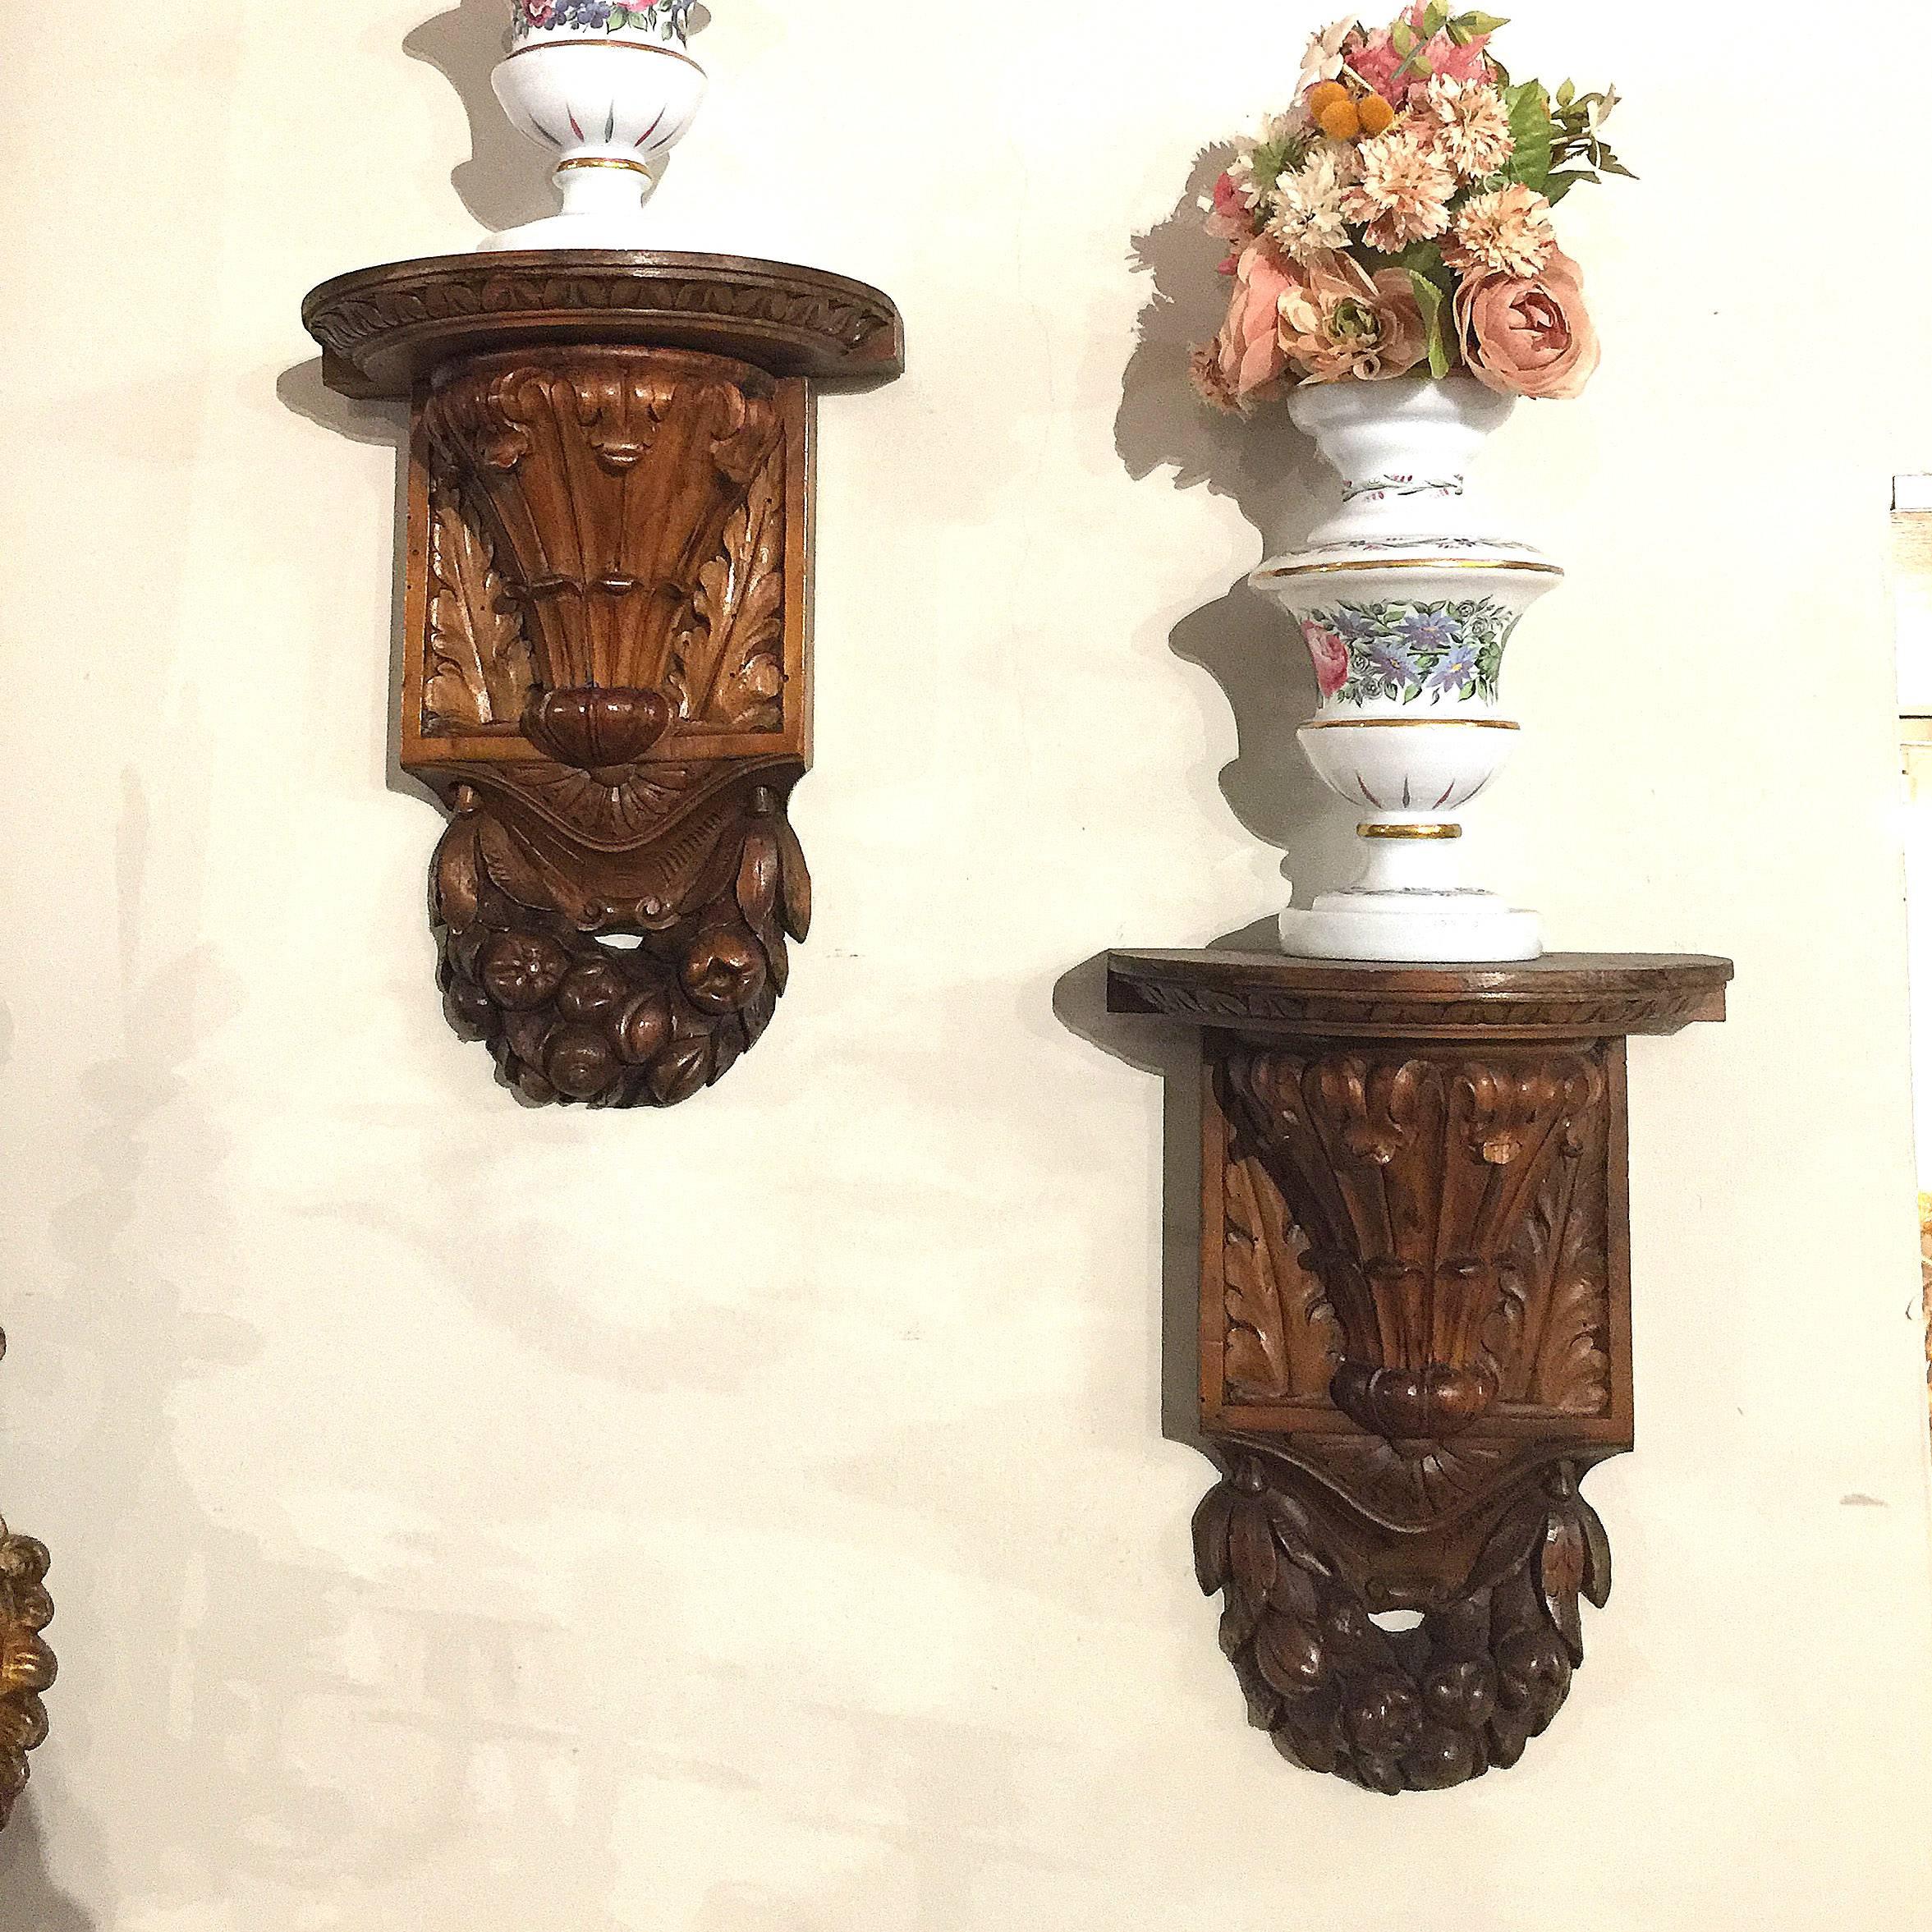 Fine pair of antique Italian walnut wood wall brackets.
Hand-carved, of demilune form, featuring acanthus leaves and garlands of fruit.
The decorative consoles are in excellent condition and have a rich walnut patina.
Pair of charming